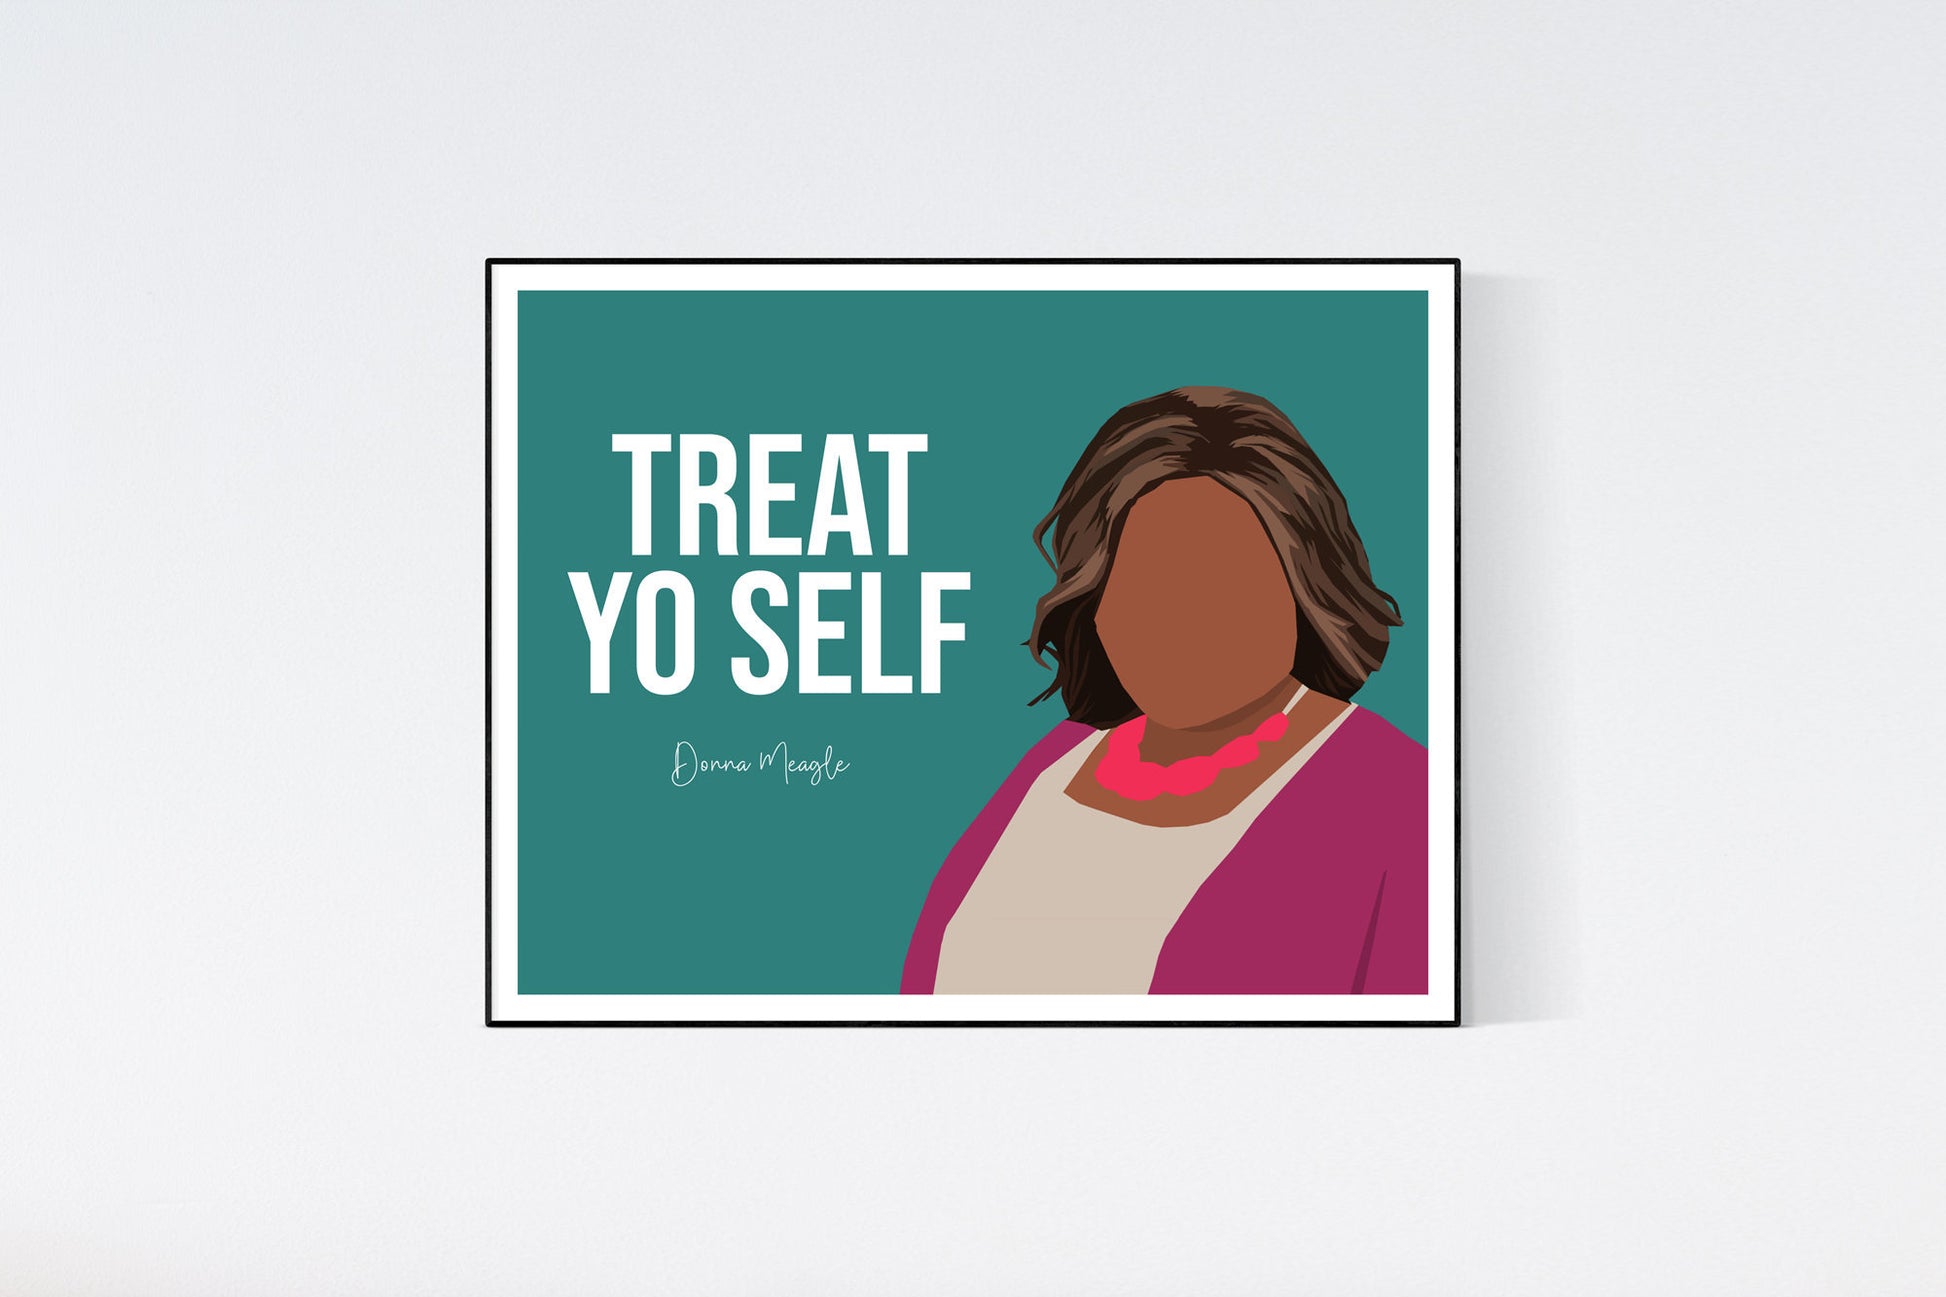 treat yo self - parks and rec quote